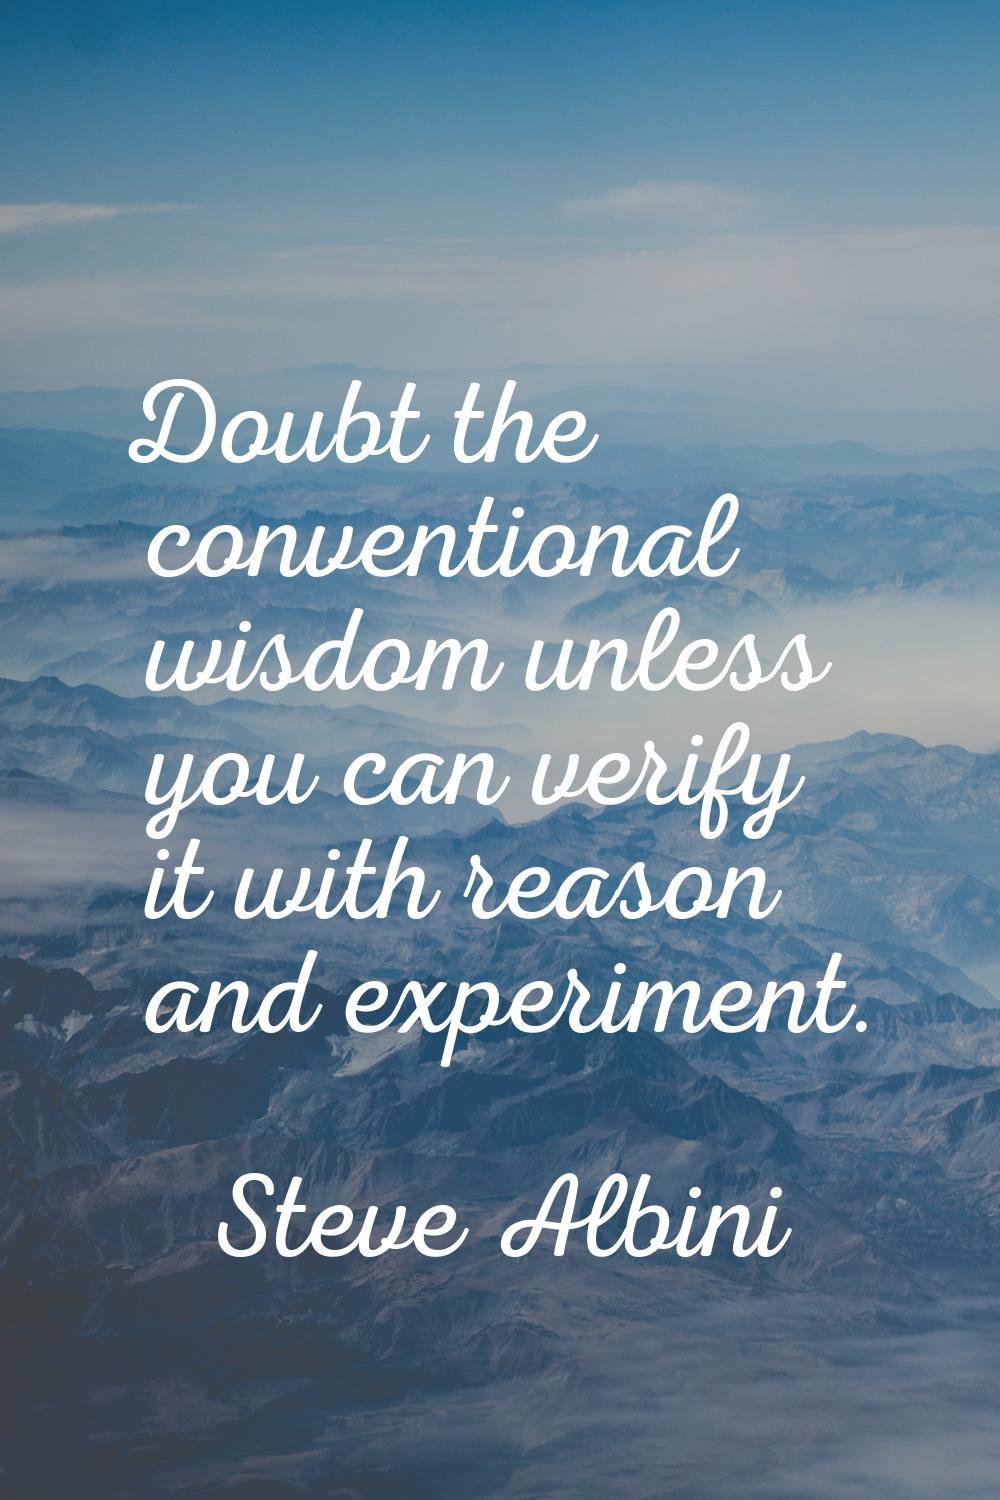 Doubt the conventional wisdom unless you can verify it with reason and experiment.